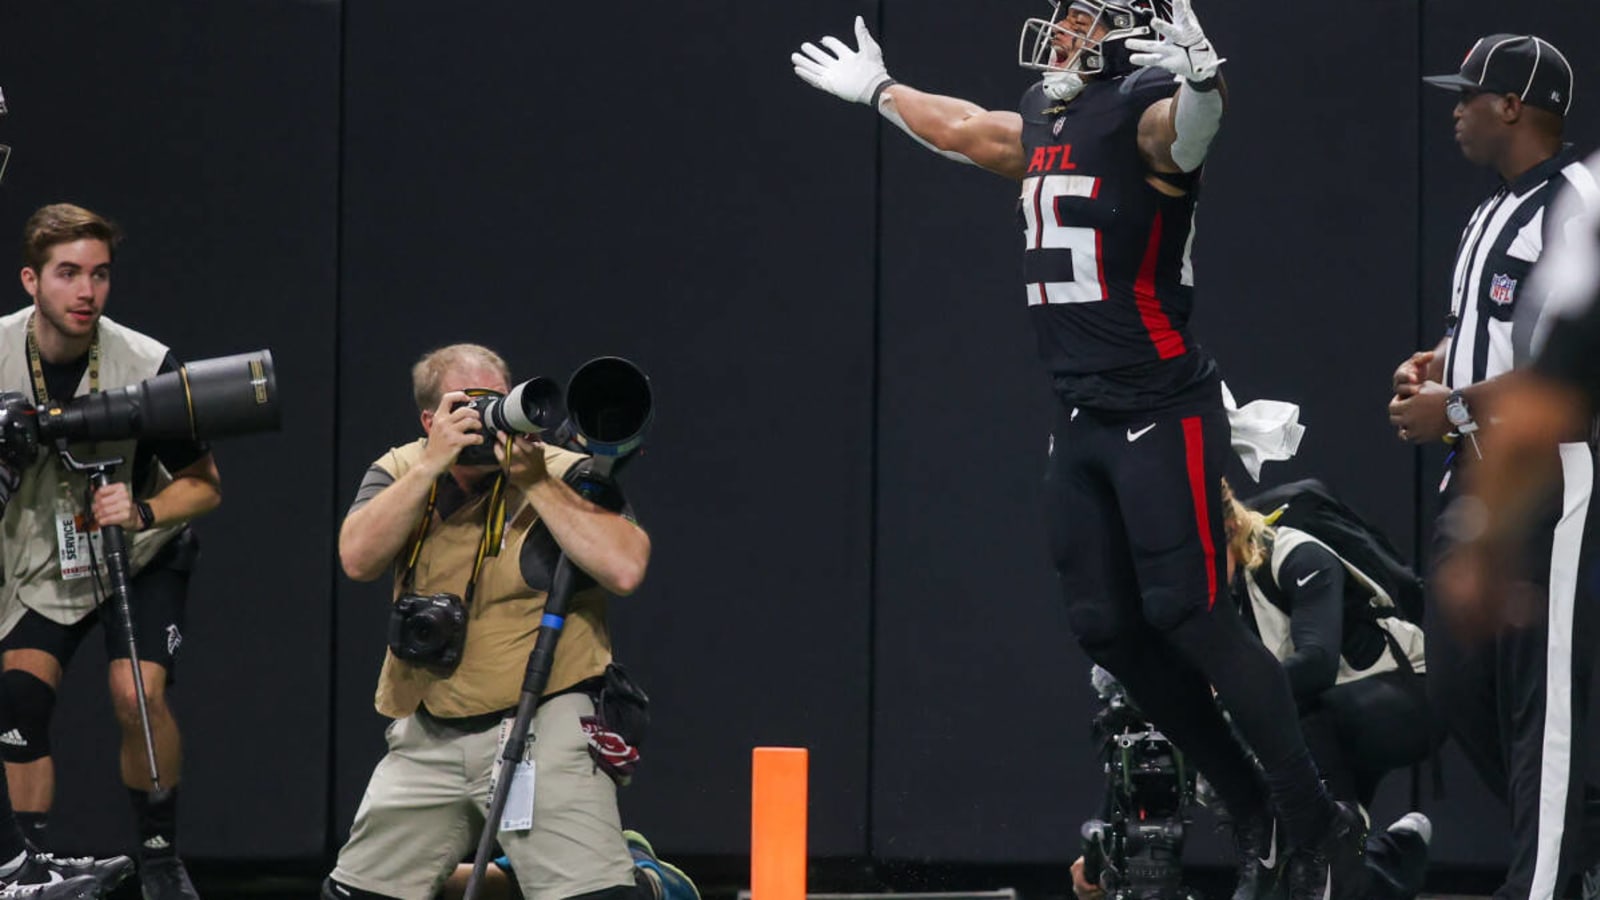 Watch: Tyler Allgeier Scores, Gives Falcons 20 Unanswered vs. Colts